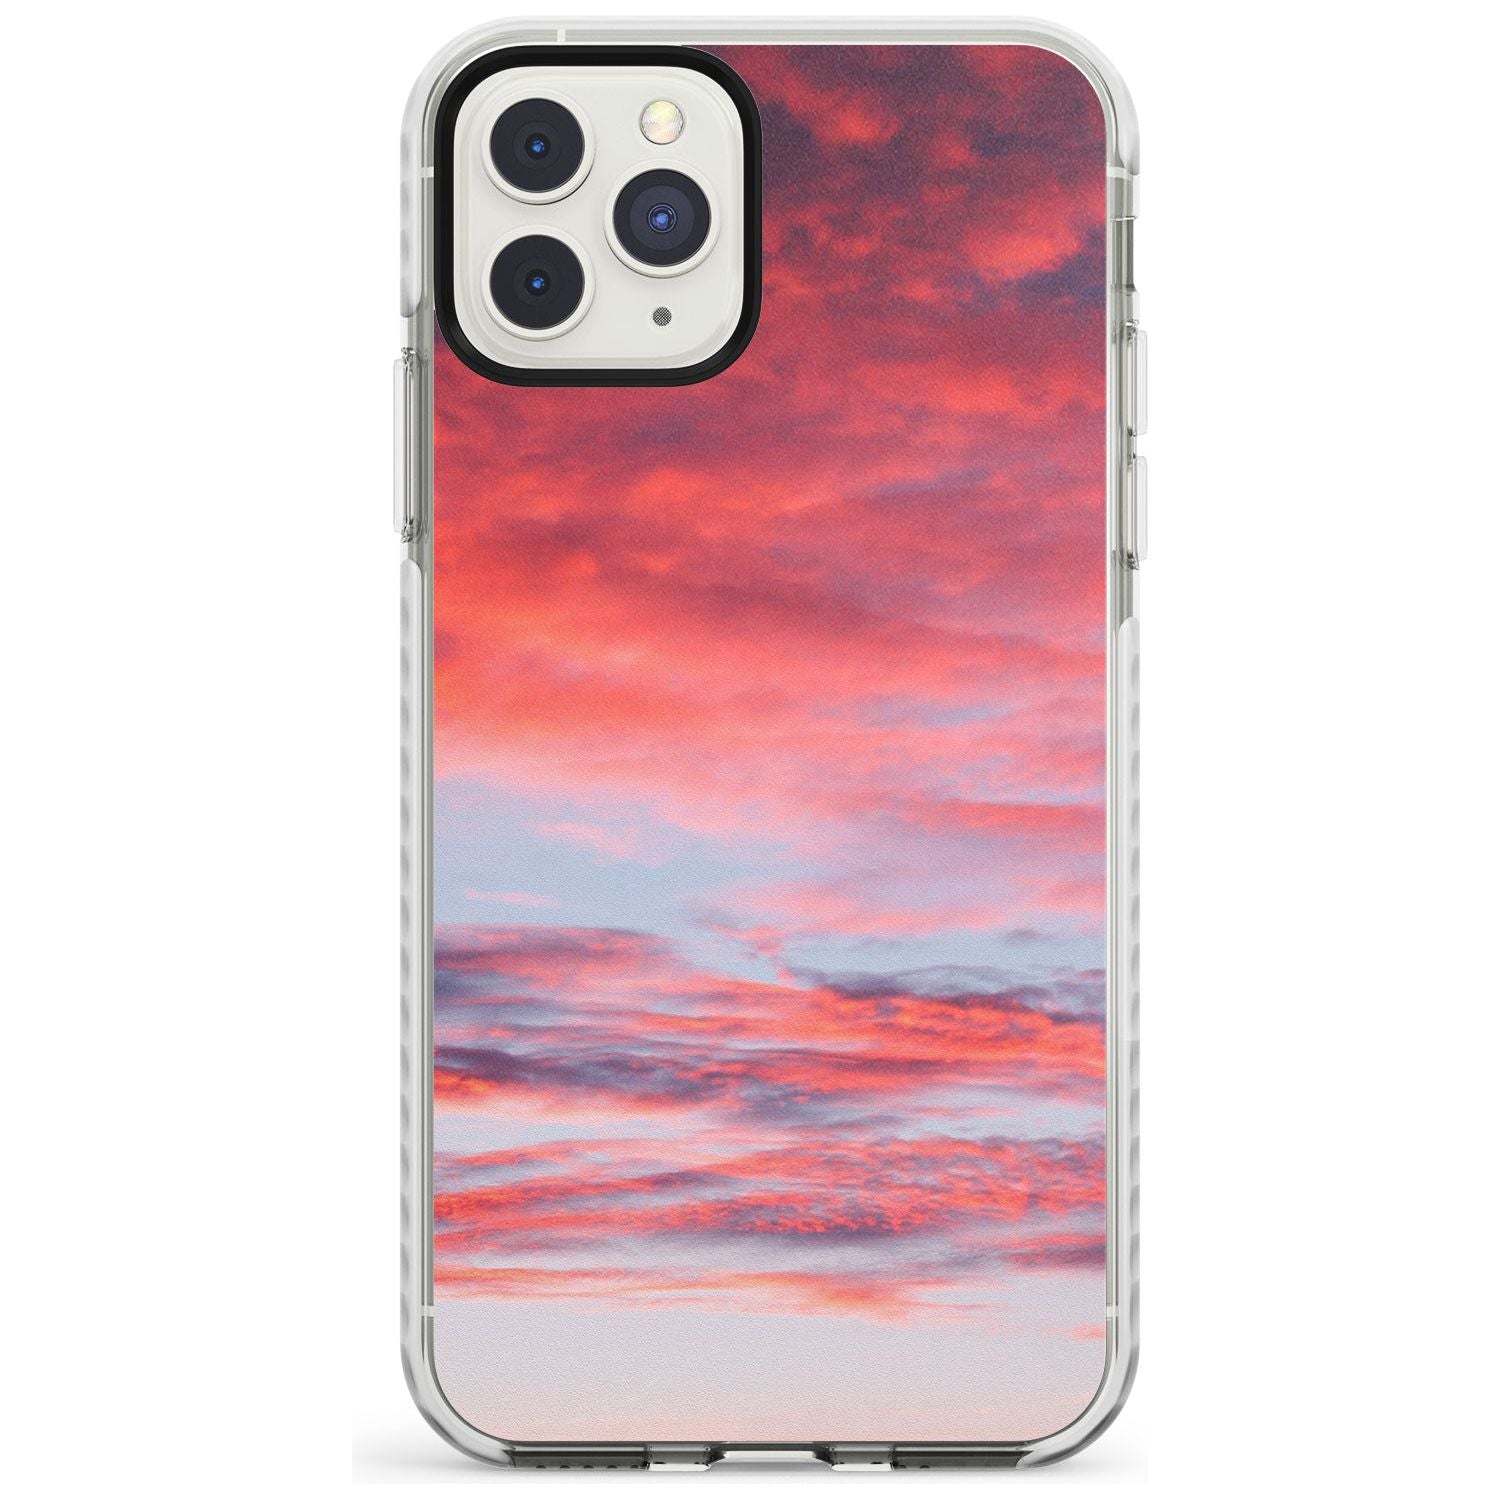 Pink Cloudy Sunset Photograph Impact Phone Case for iPhone 11 Pro Max